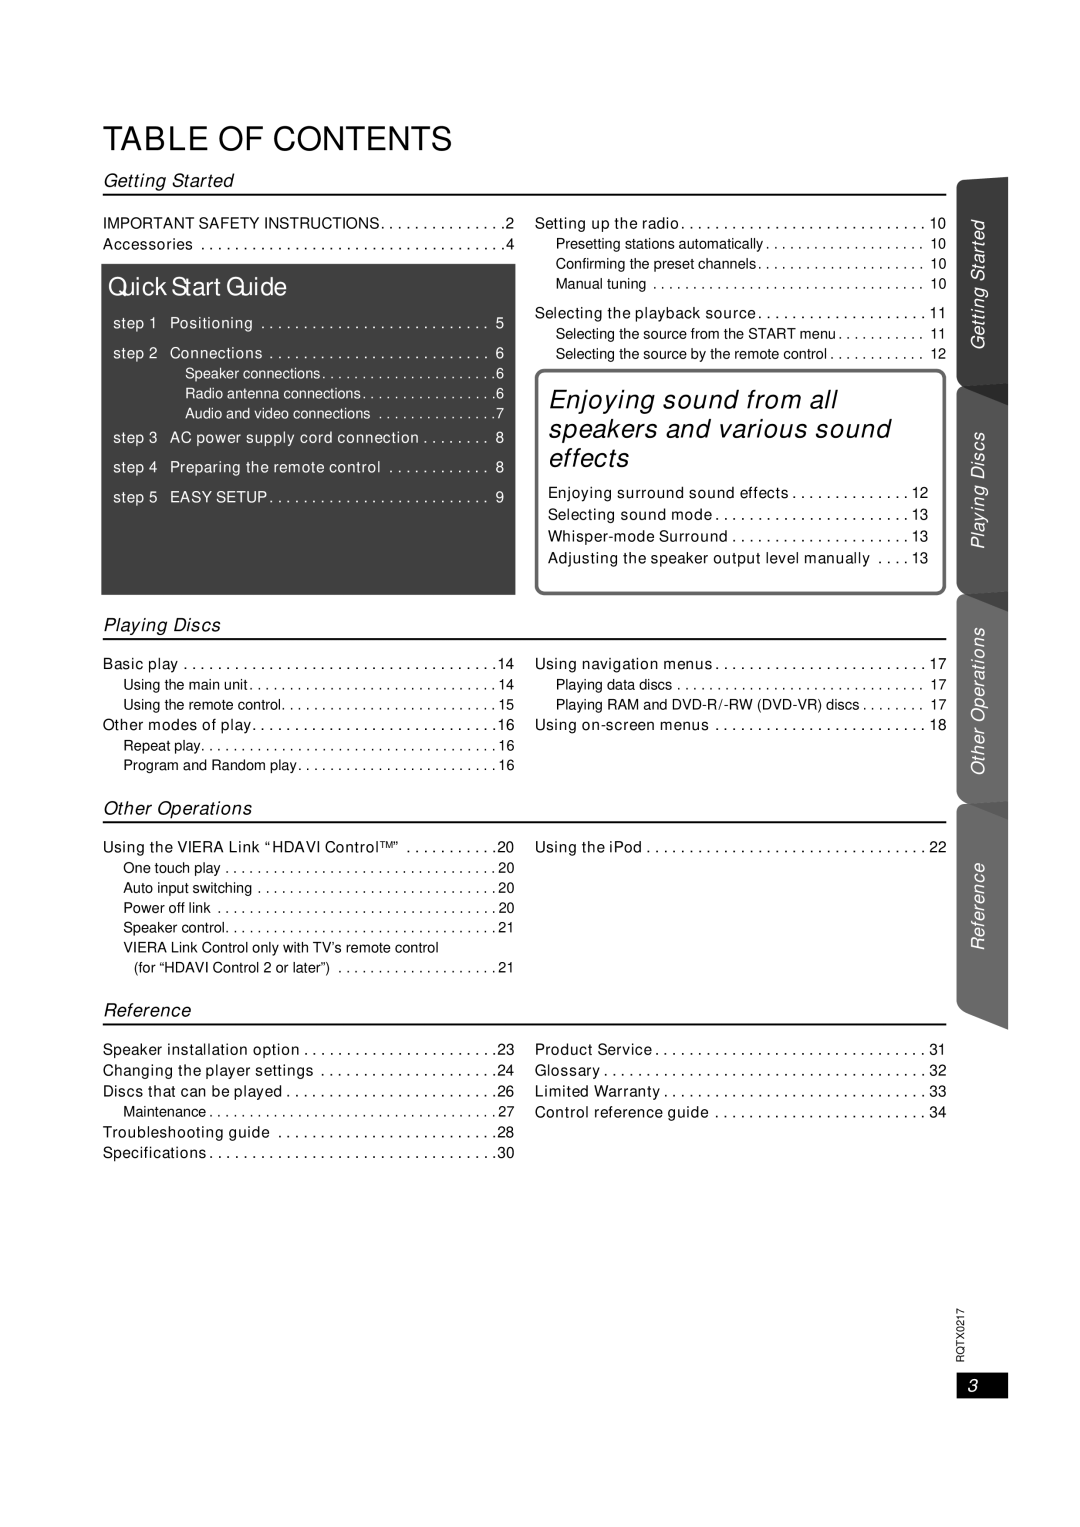 Panasonic SC-PT464 manual Table Of Contents, Getting Started Playing Discs, Other Operations, Reference, Quick Start Guide 